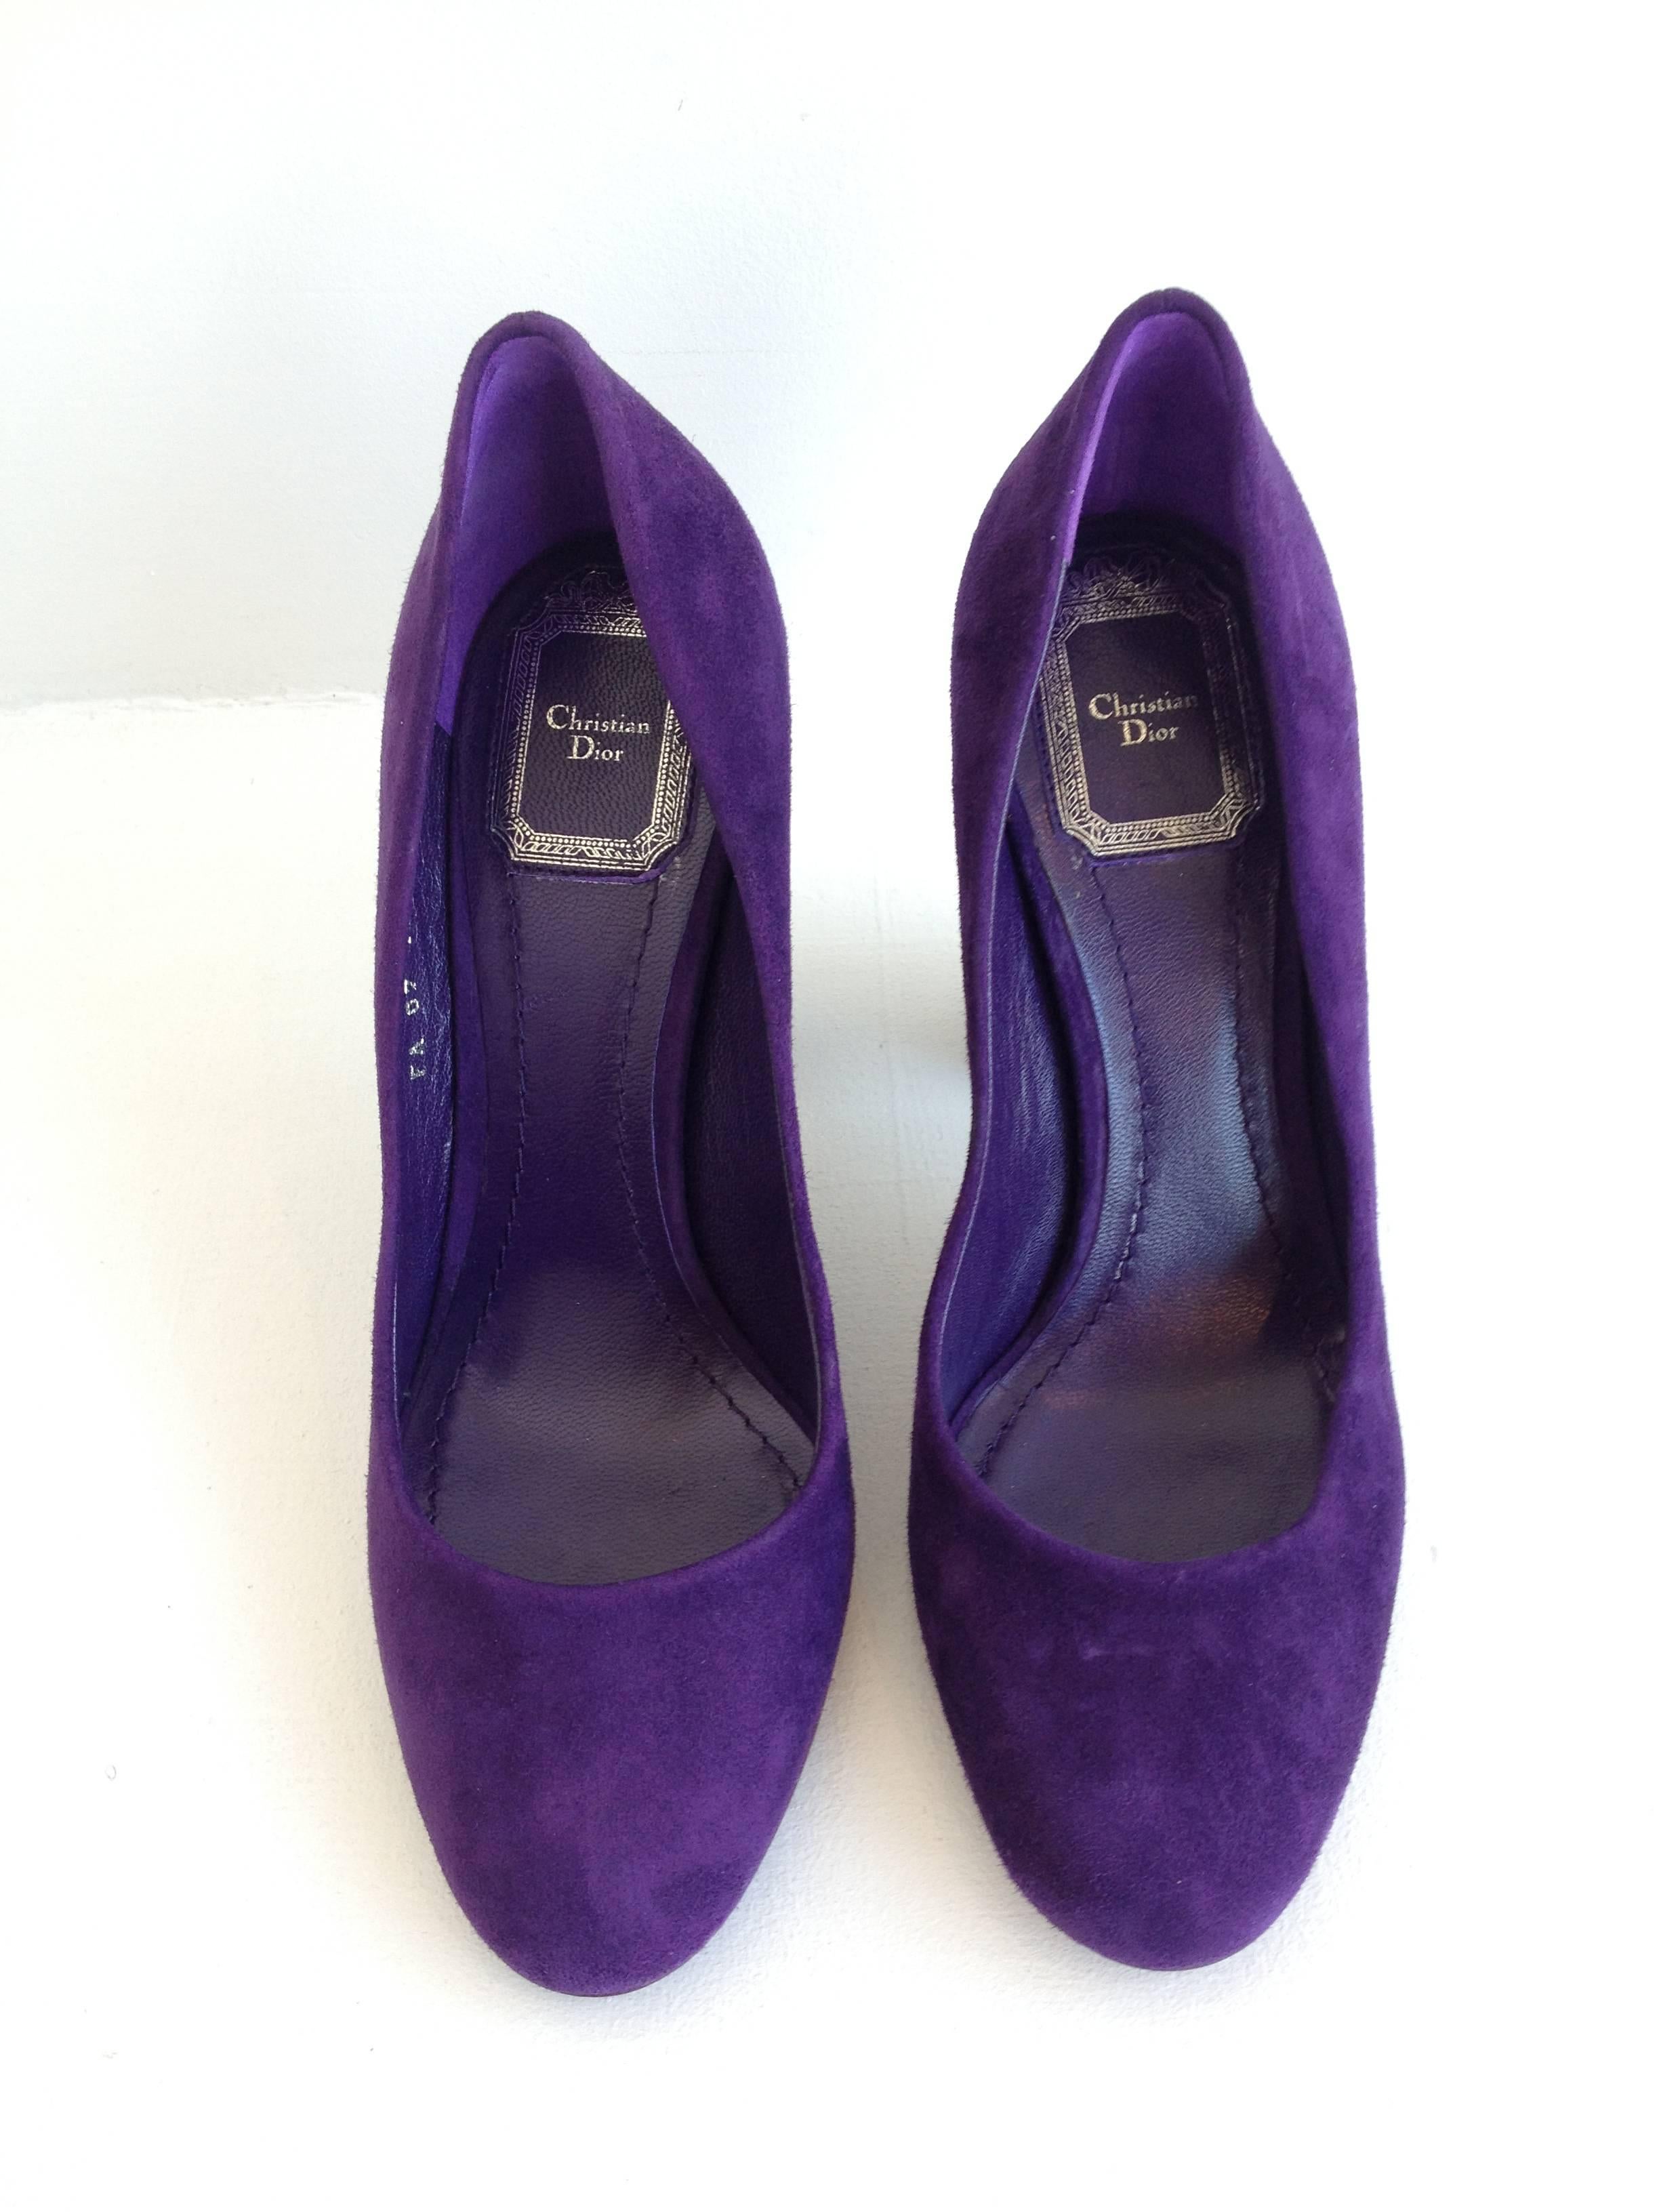 Graphic and bold, these pumps by Christian Dior have elements of the modern and of the classic. The bold cylindrical 4 inch heels are contemporary and fun, while the round toe is perfectly simple. Bright purple suede makes them really pop.